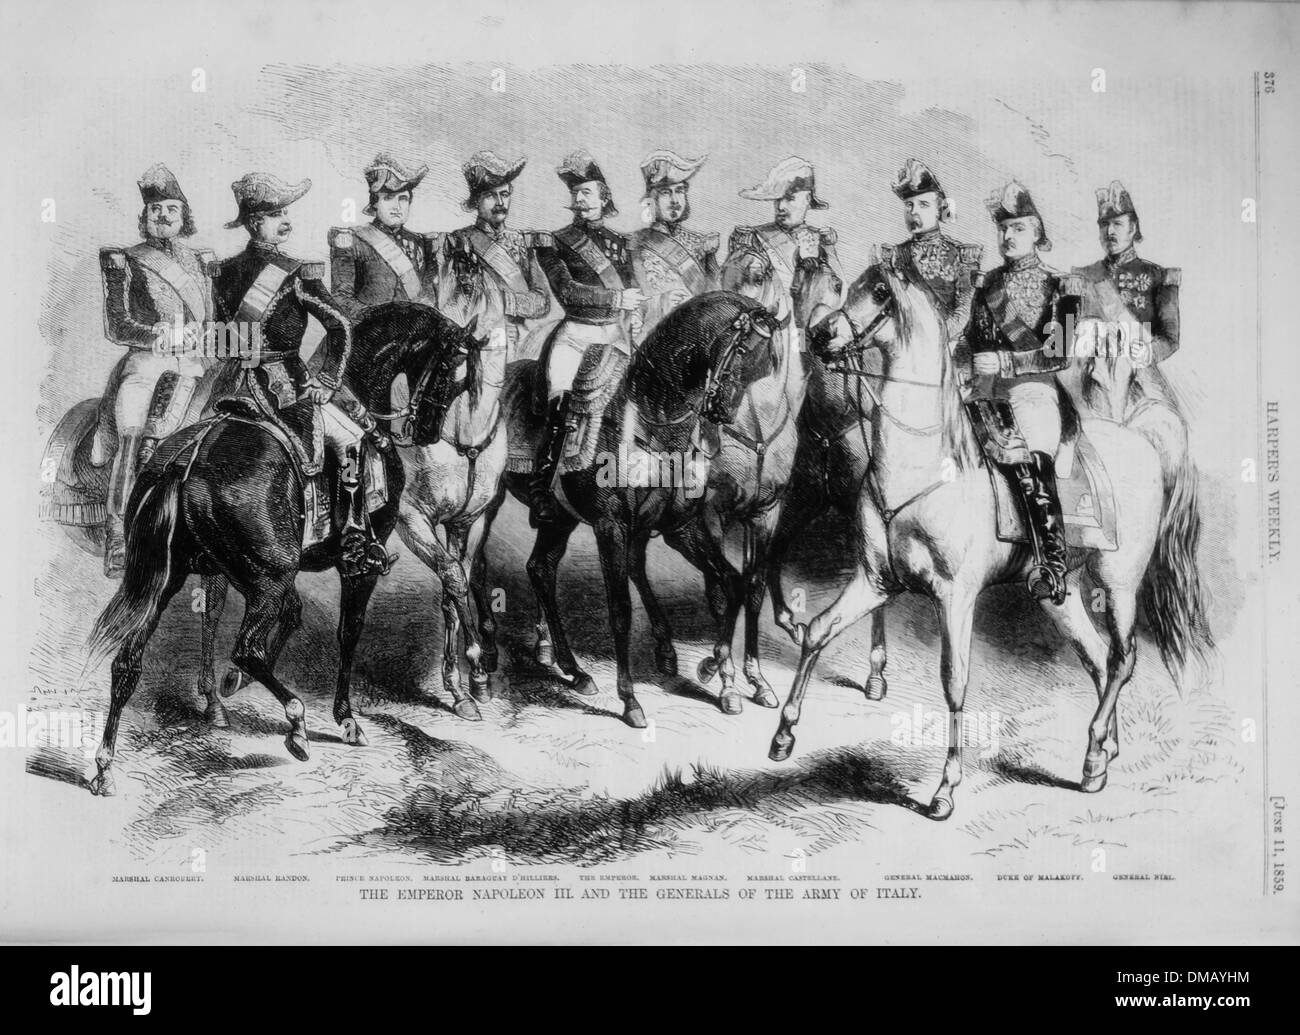 Emperor Napoleon III and Generals of the Army of Italy, Engraving from Harper's Weekly, 1859 Stock Photo